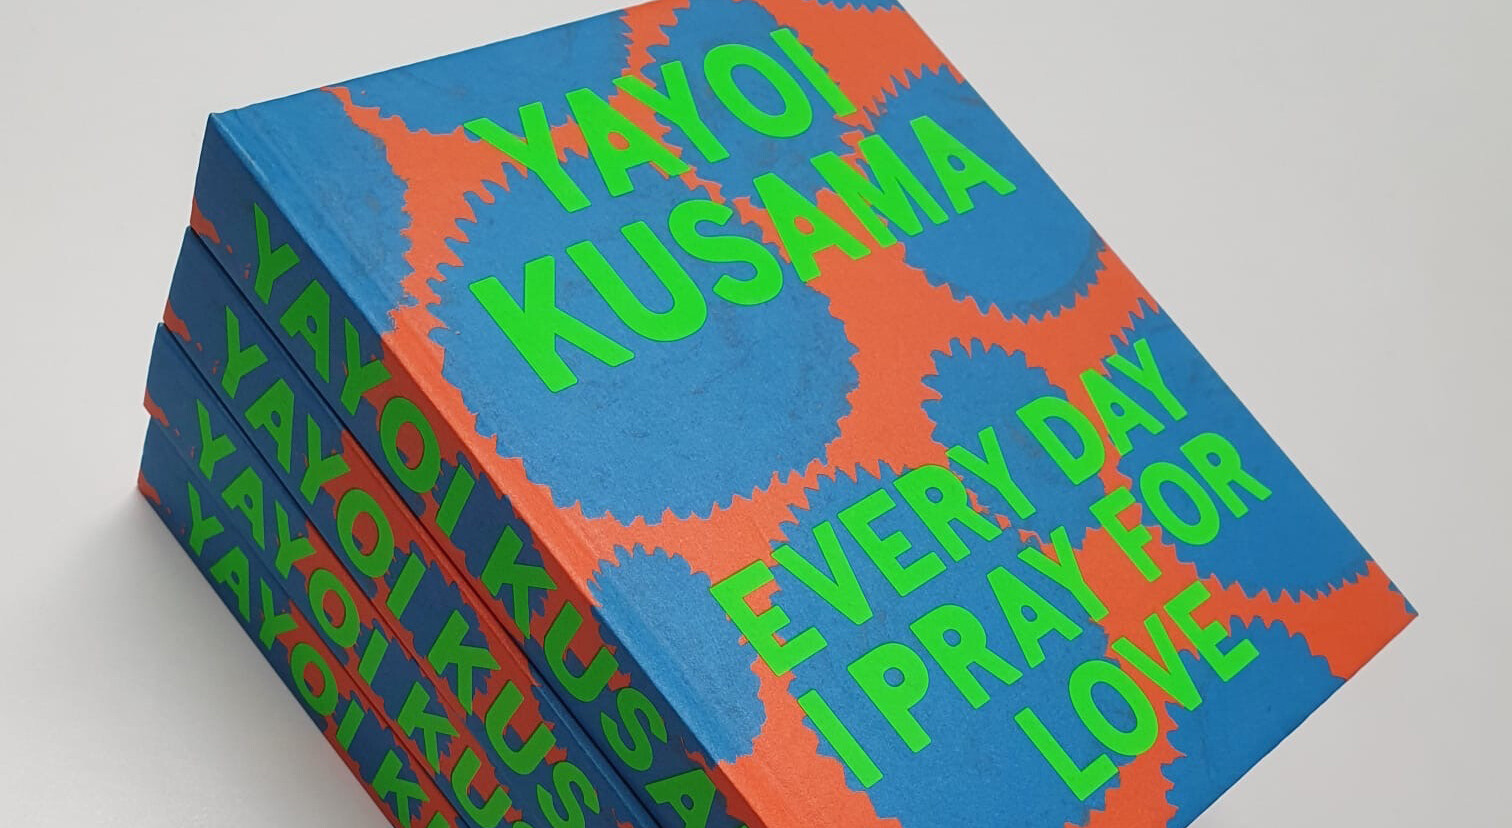 A photo of a book by Yayoi Kusama, titled Every Day I Pray for Love, published in 2020.